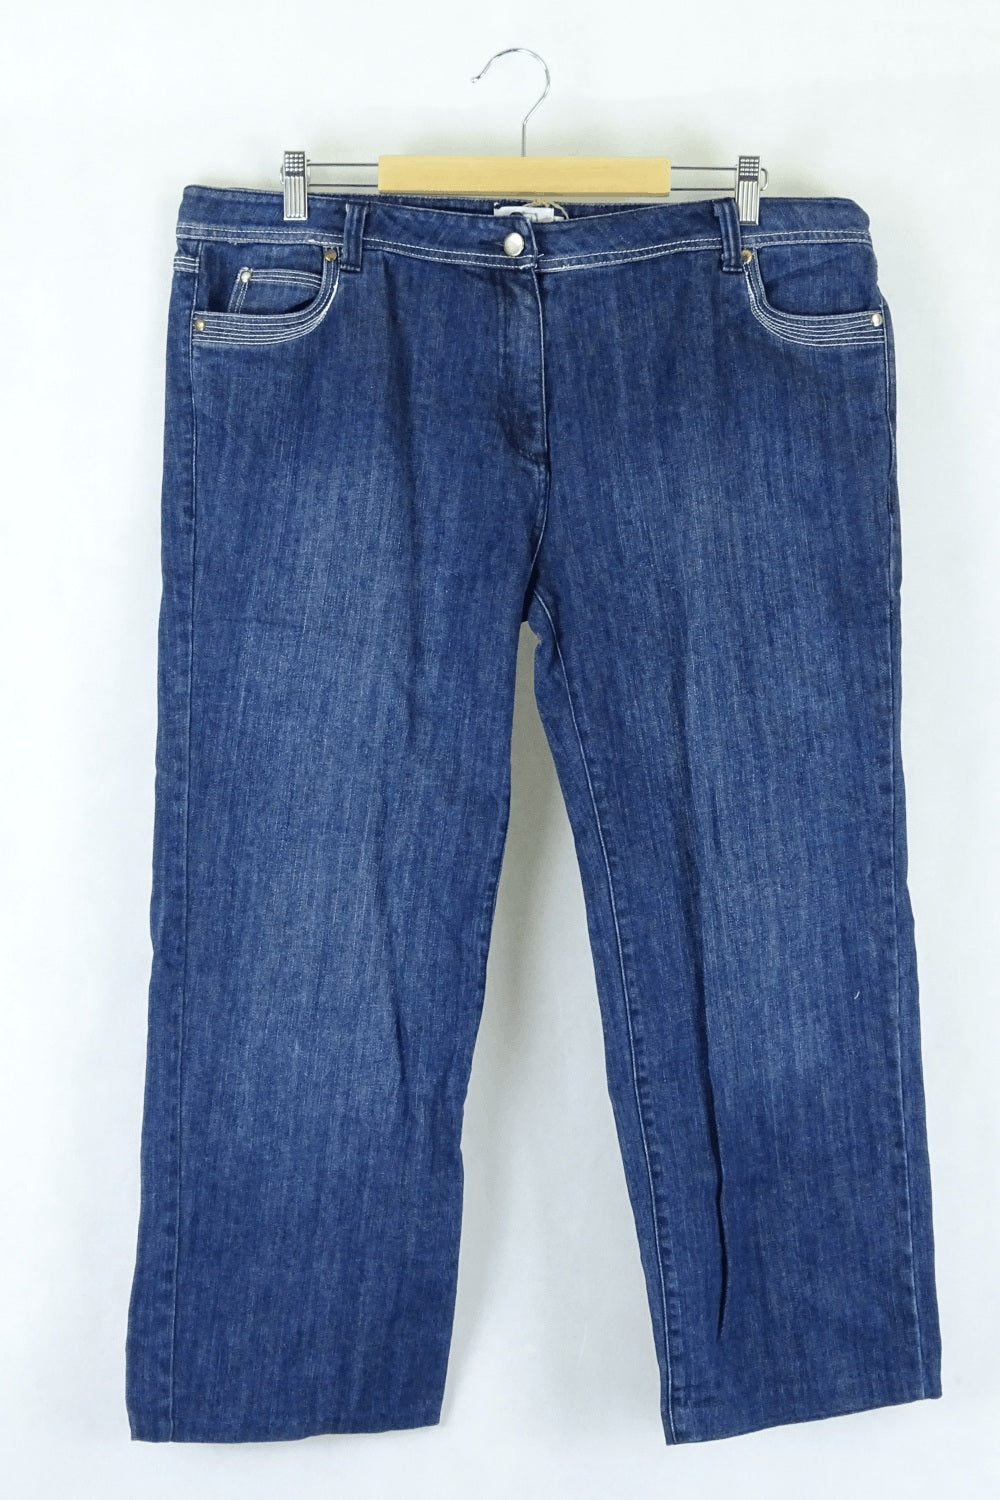 G2 By George Gross Denim Jeans 16 - Reluv Clothing Australia